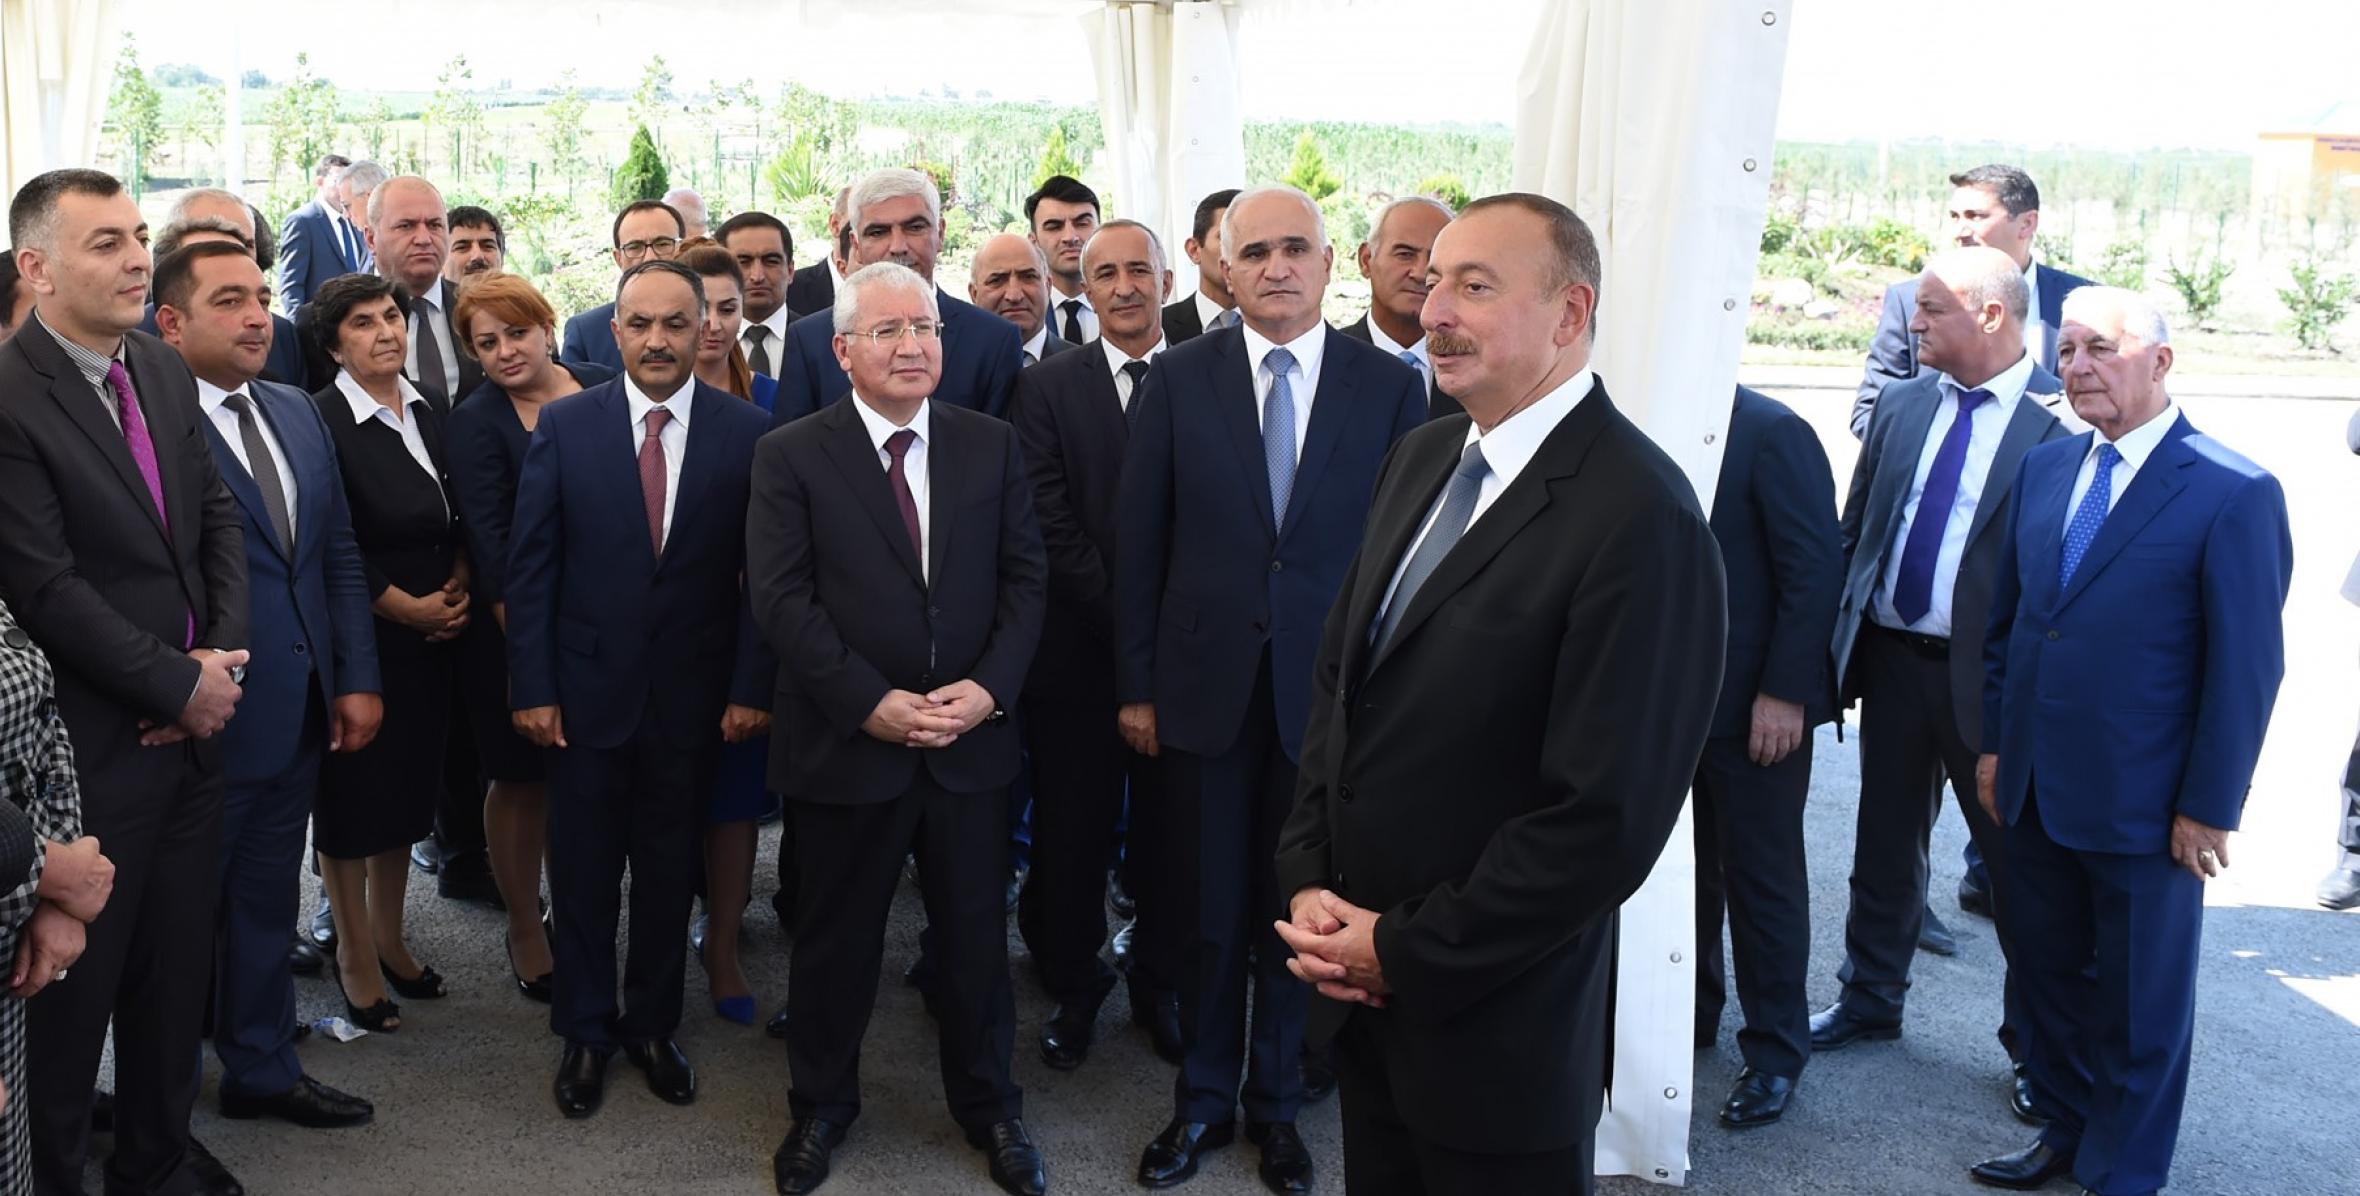 Speech by Ilham Aliyev at the opening of Yalama Agropark